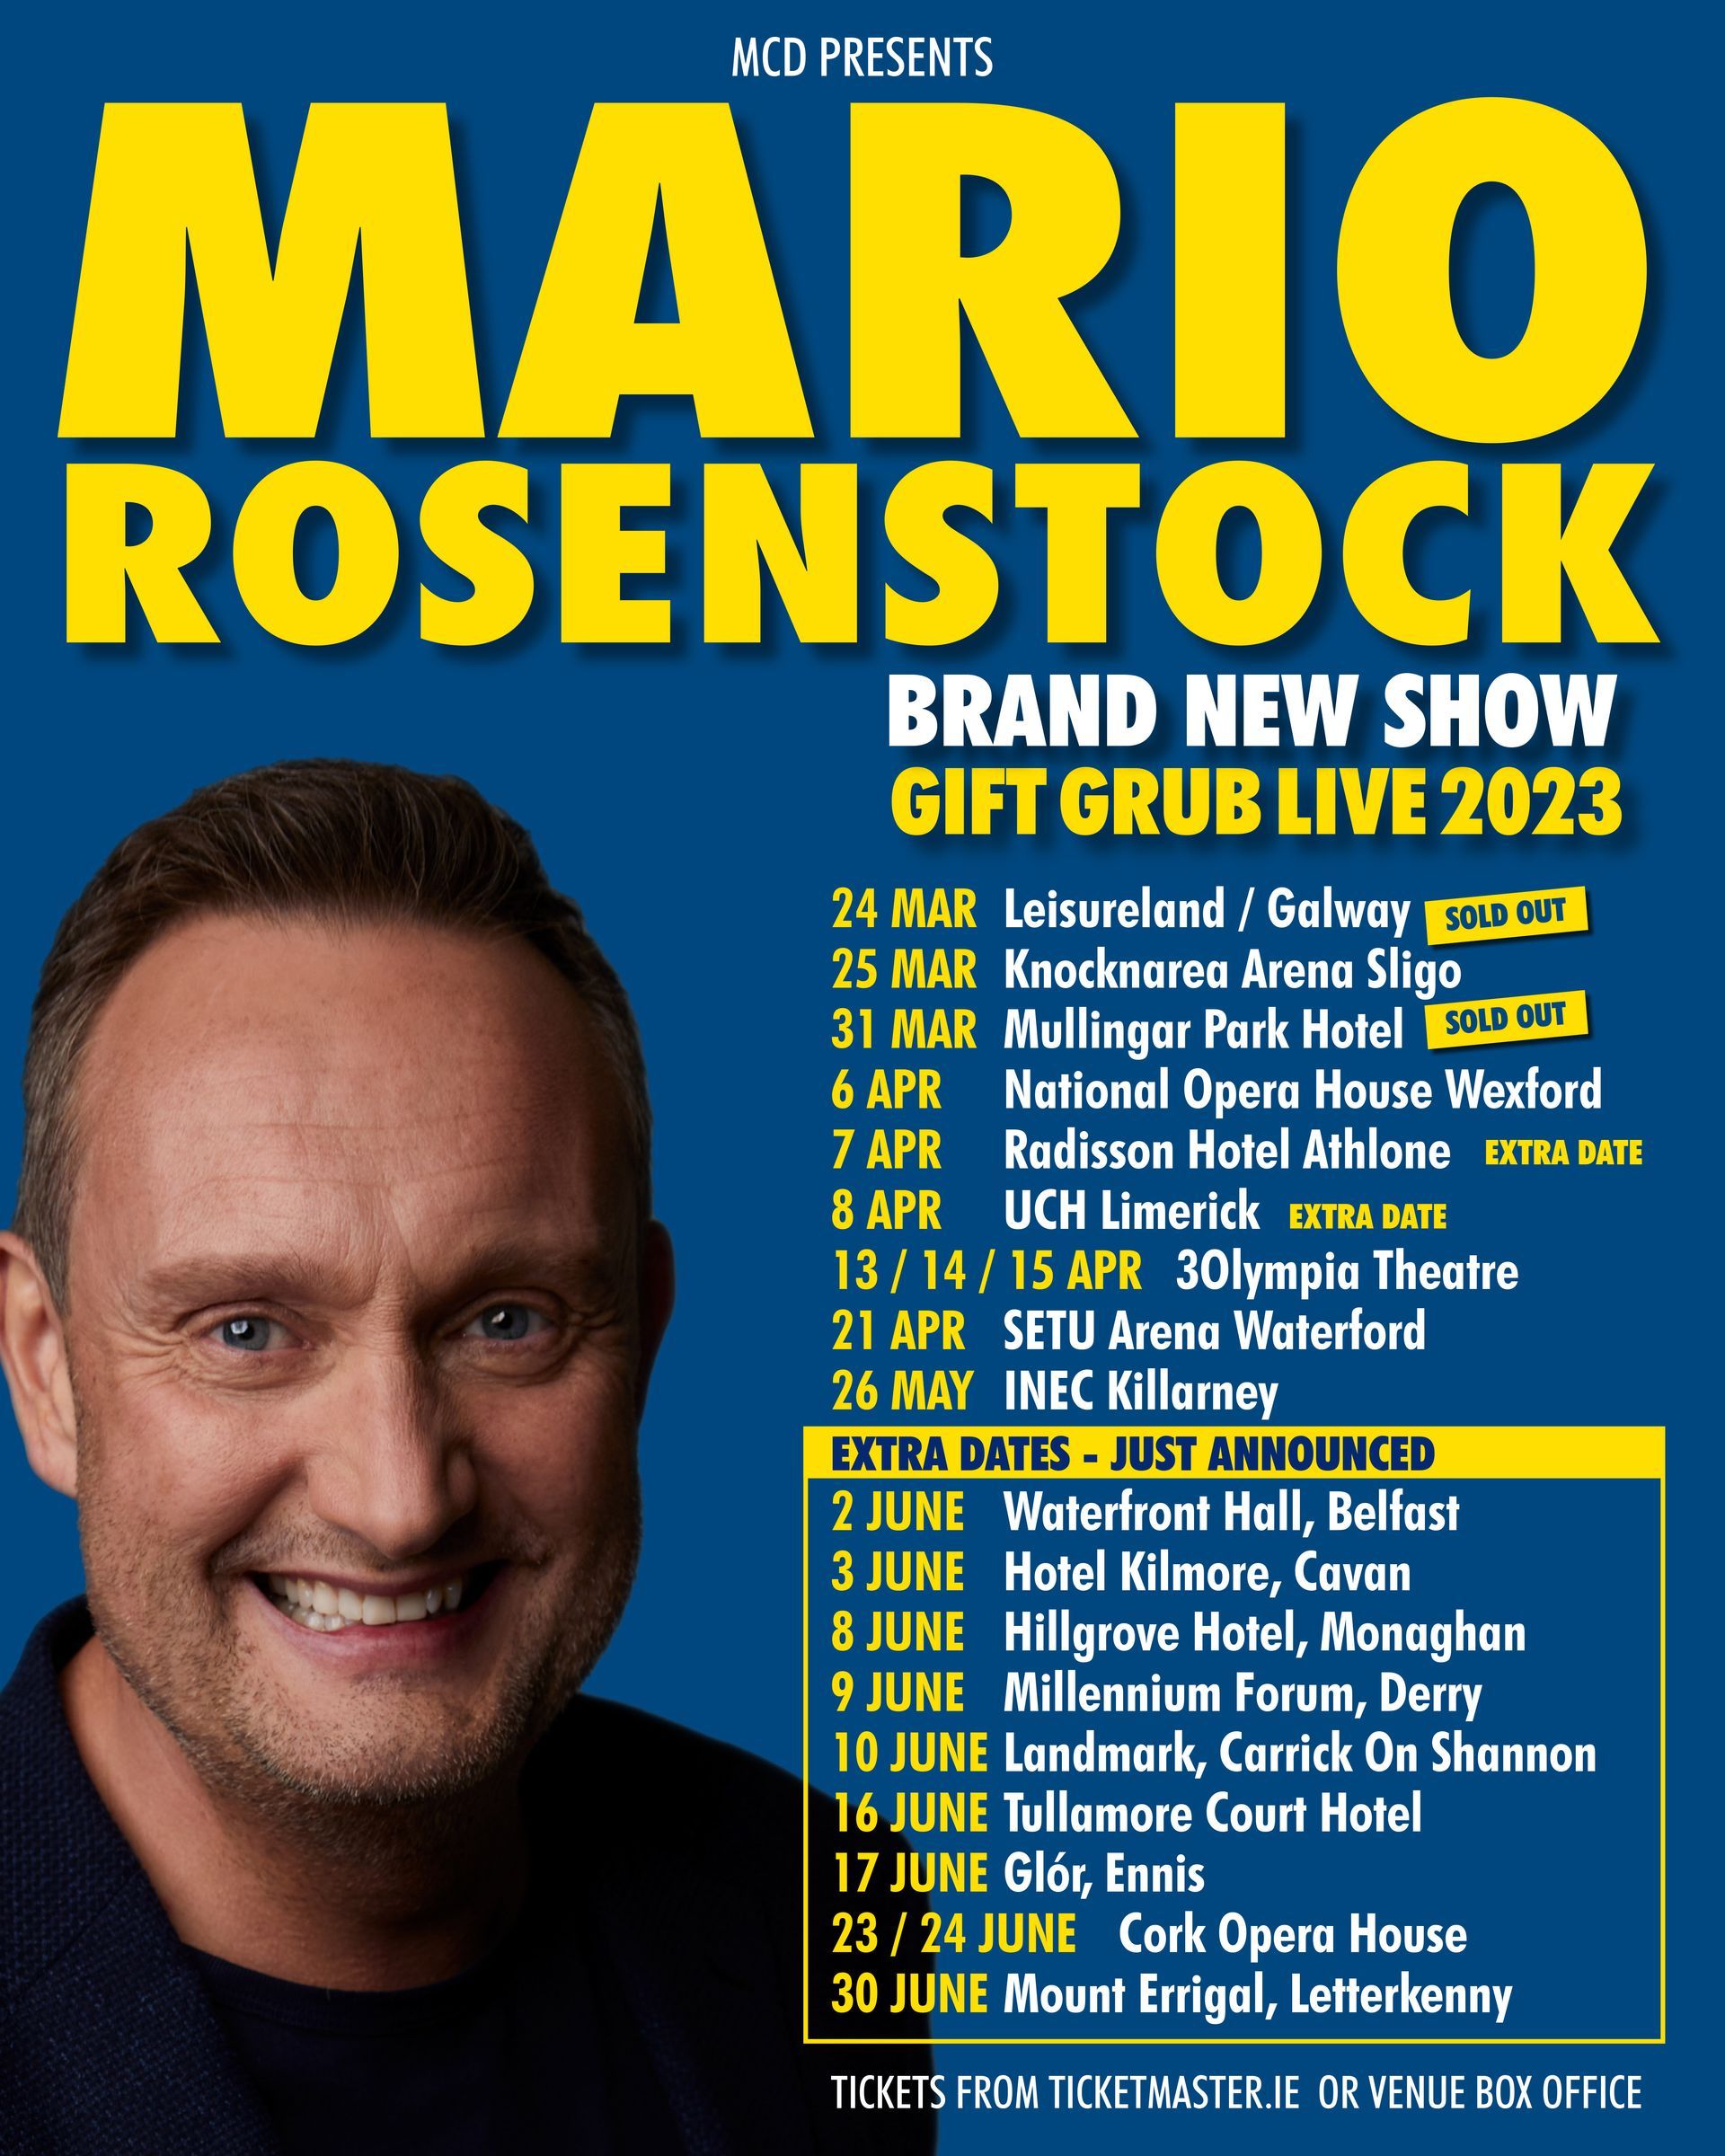 Gift Grub Live 2023  starring Mario Rosenstock  NATIONWIDE TOUR  EXTRA DATES ADDED